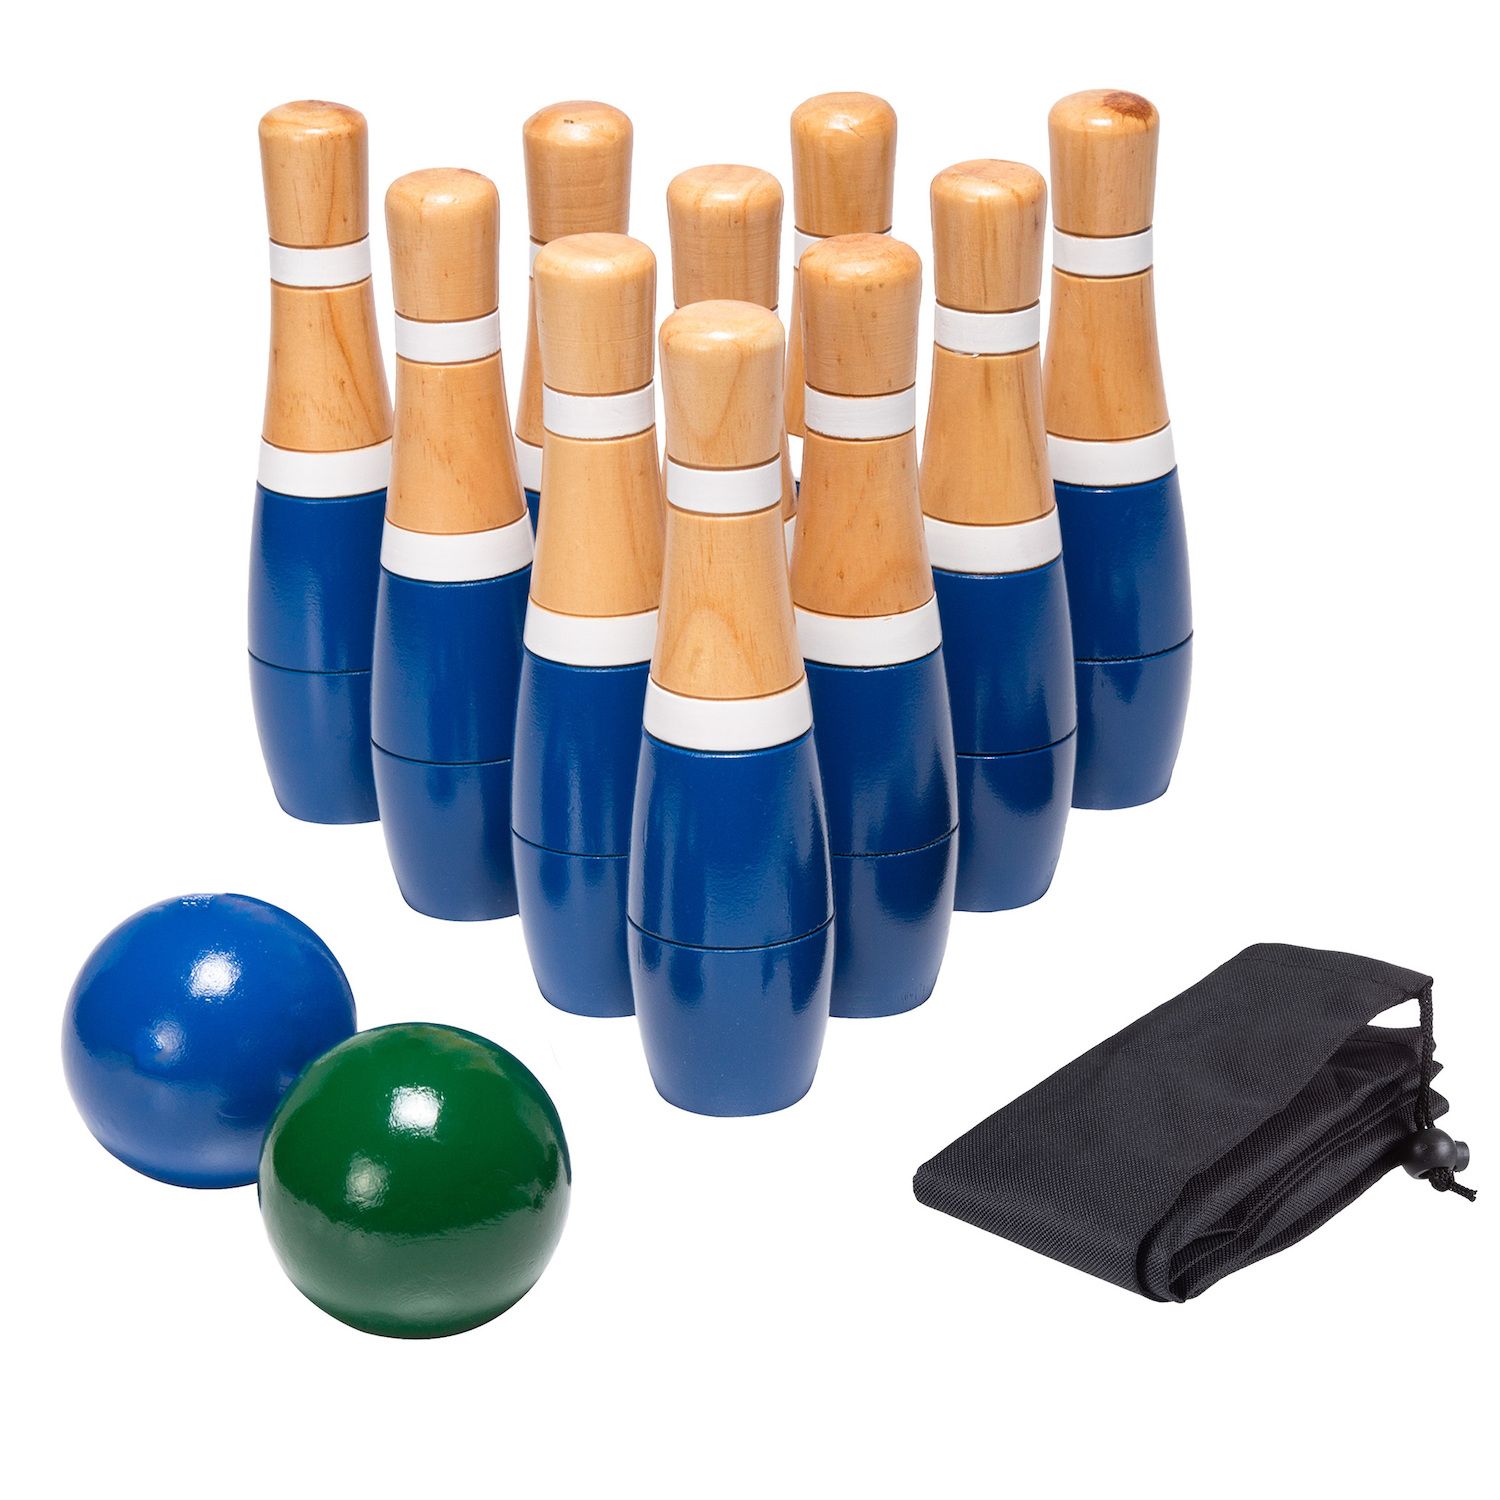 Image for Hey! Play! 8-in. Wooden Lawn Bowling Set at Kohl's.